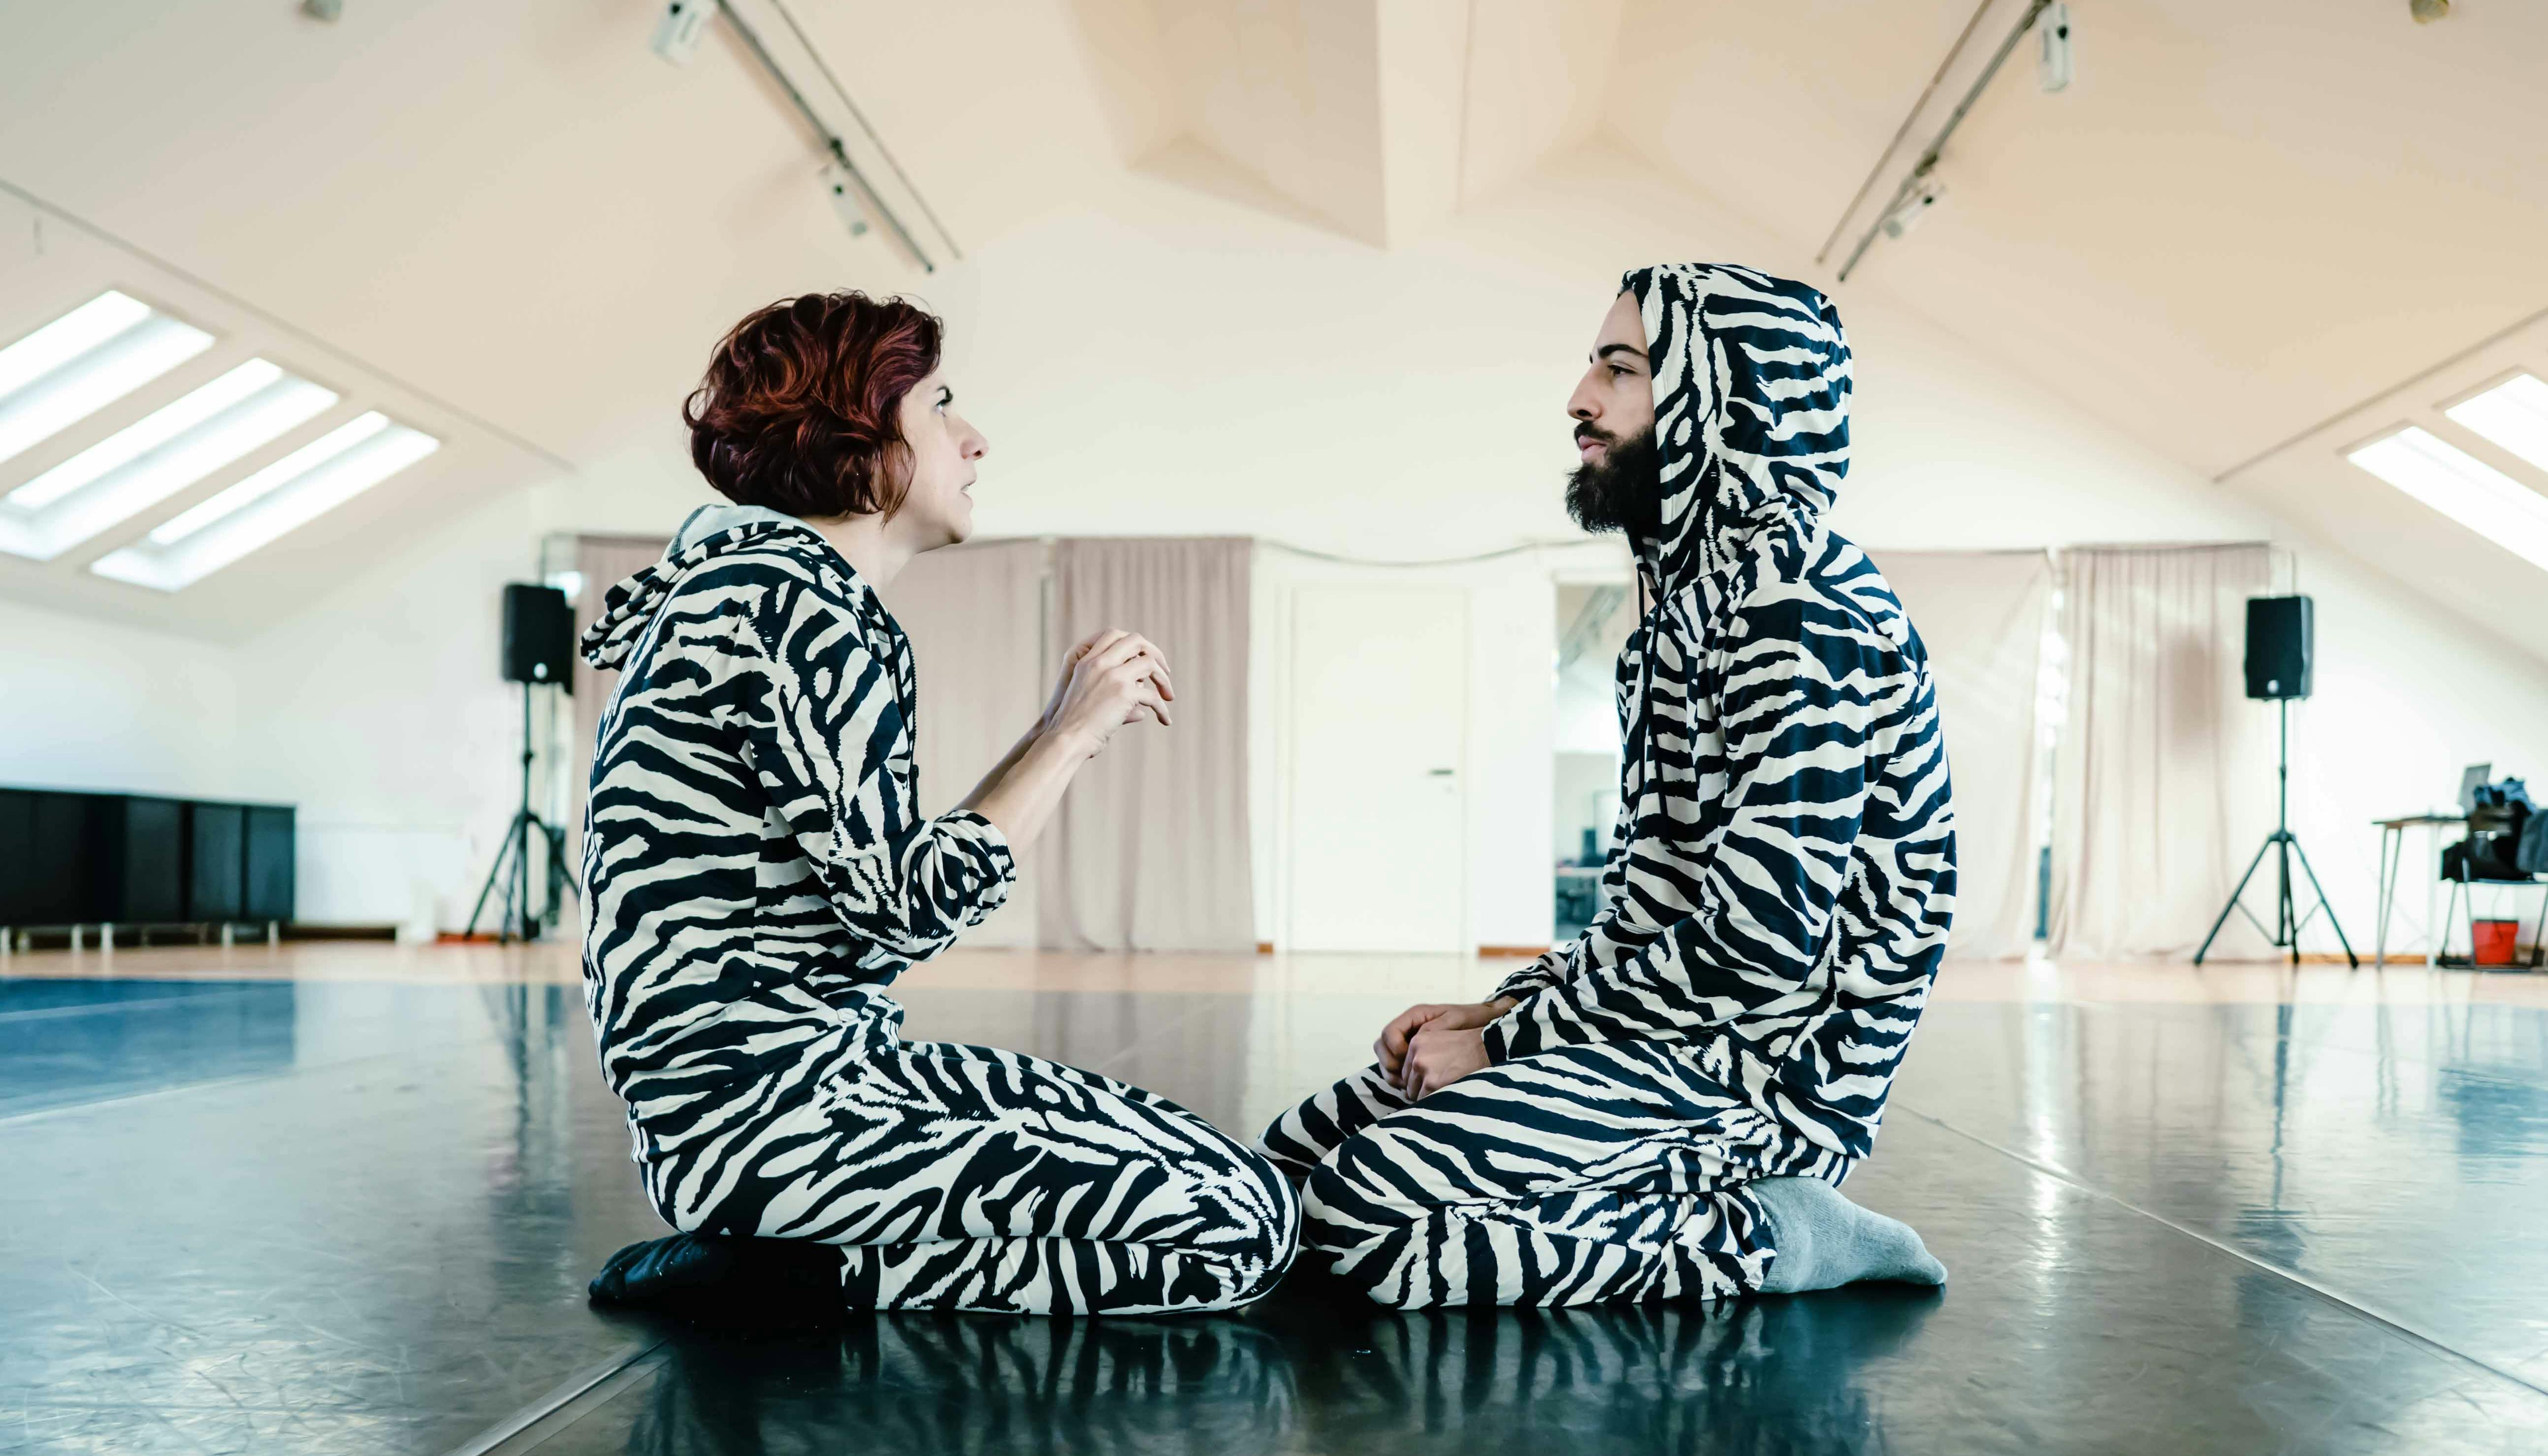 Giselda and Michael dressed in zebra pants and sweatshirt kneeling in front of each other